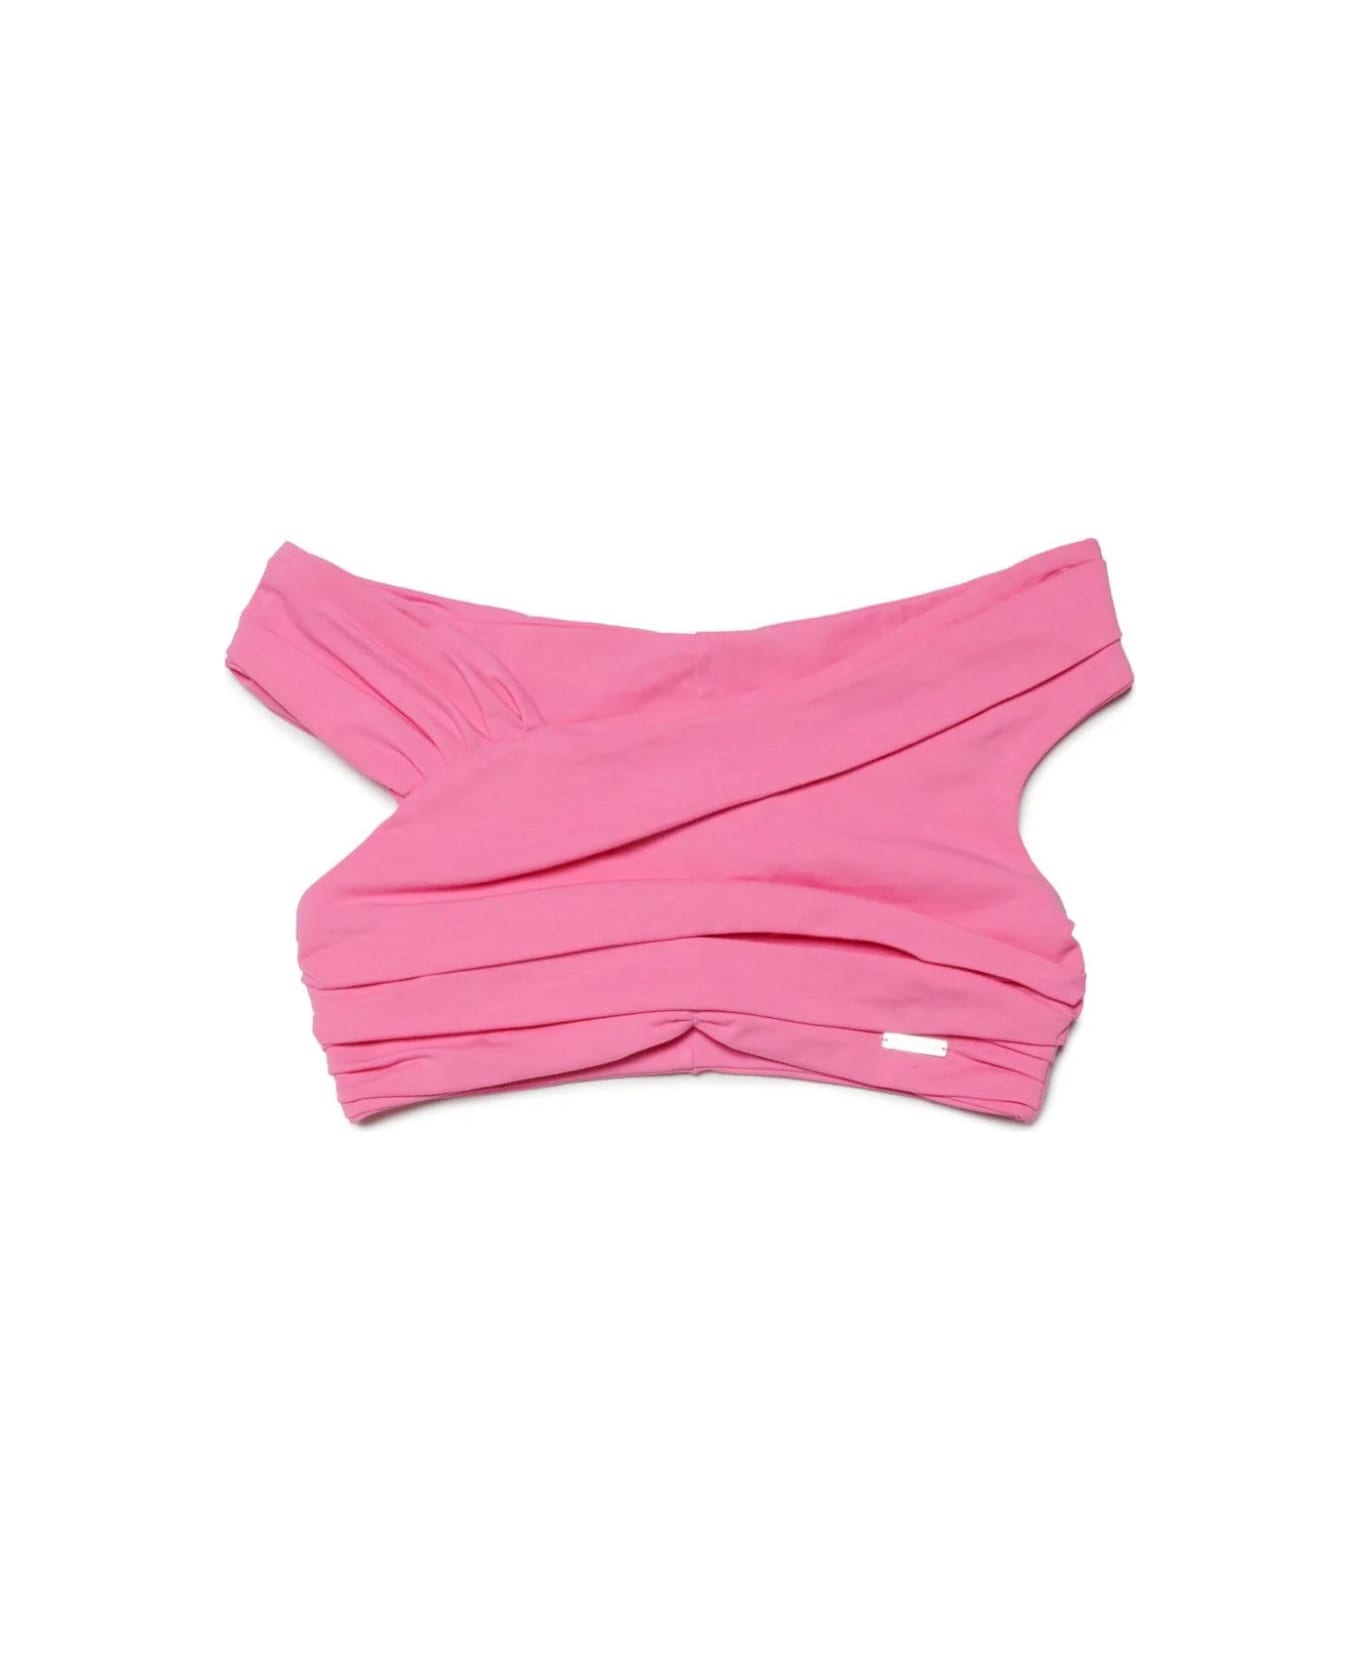 Dsquared2 Top Corto Con Ruches - Pink トップス